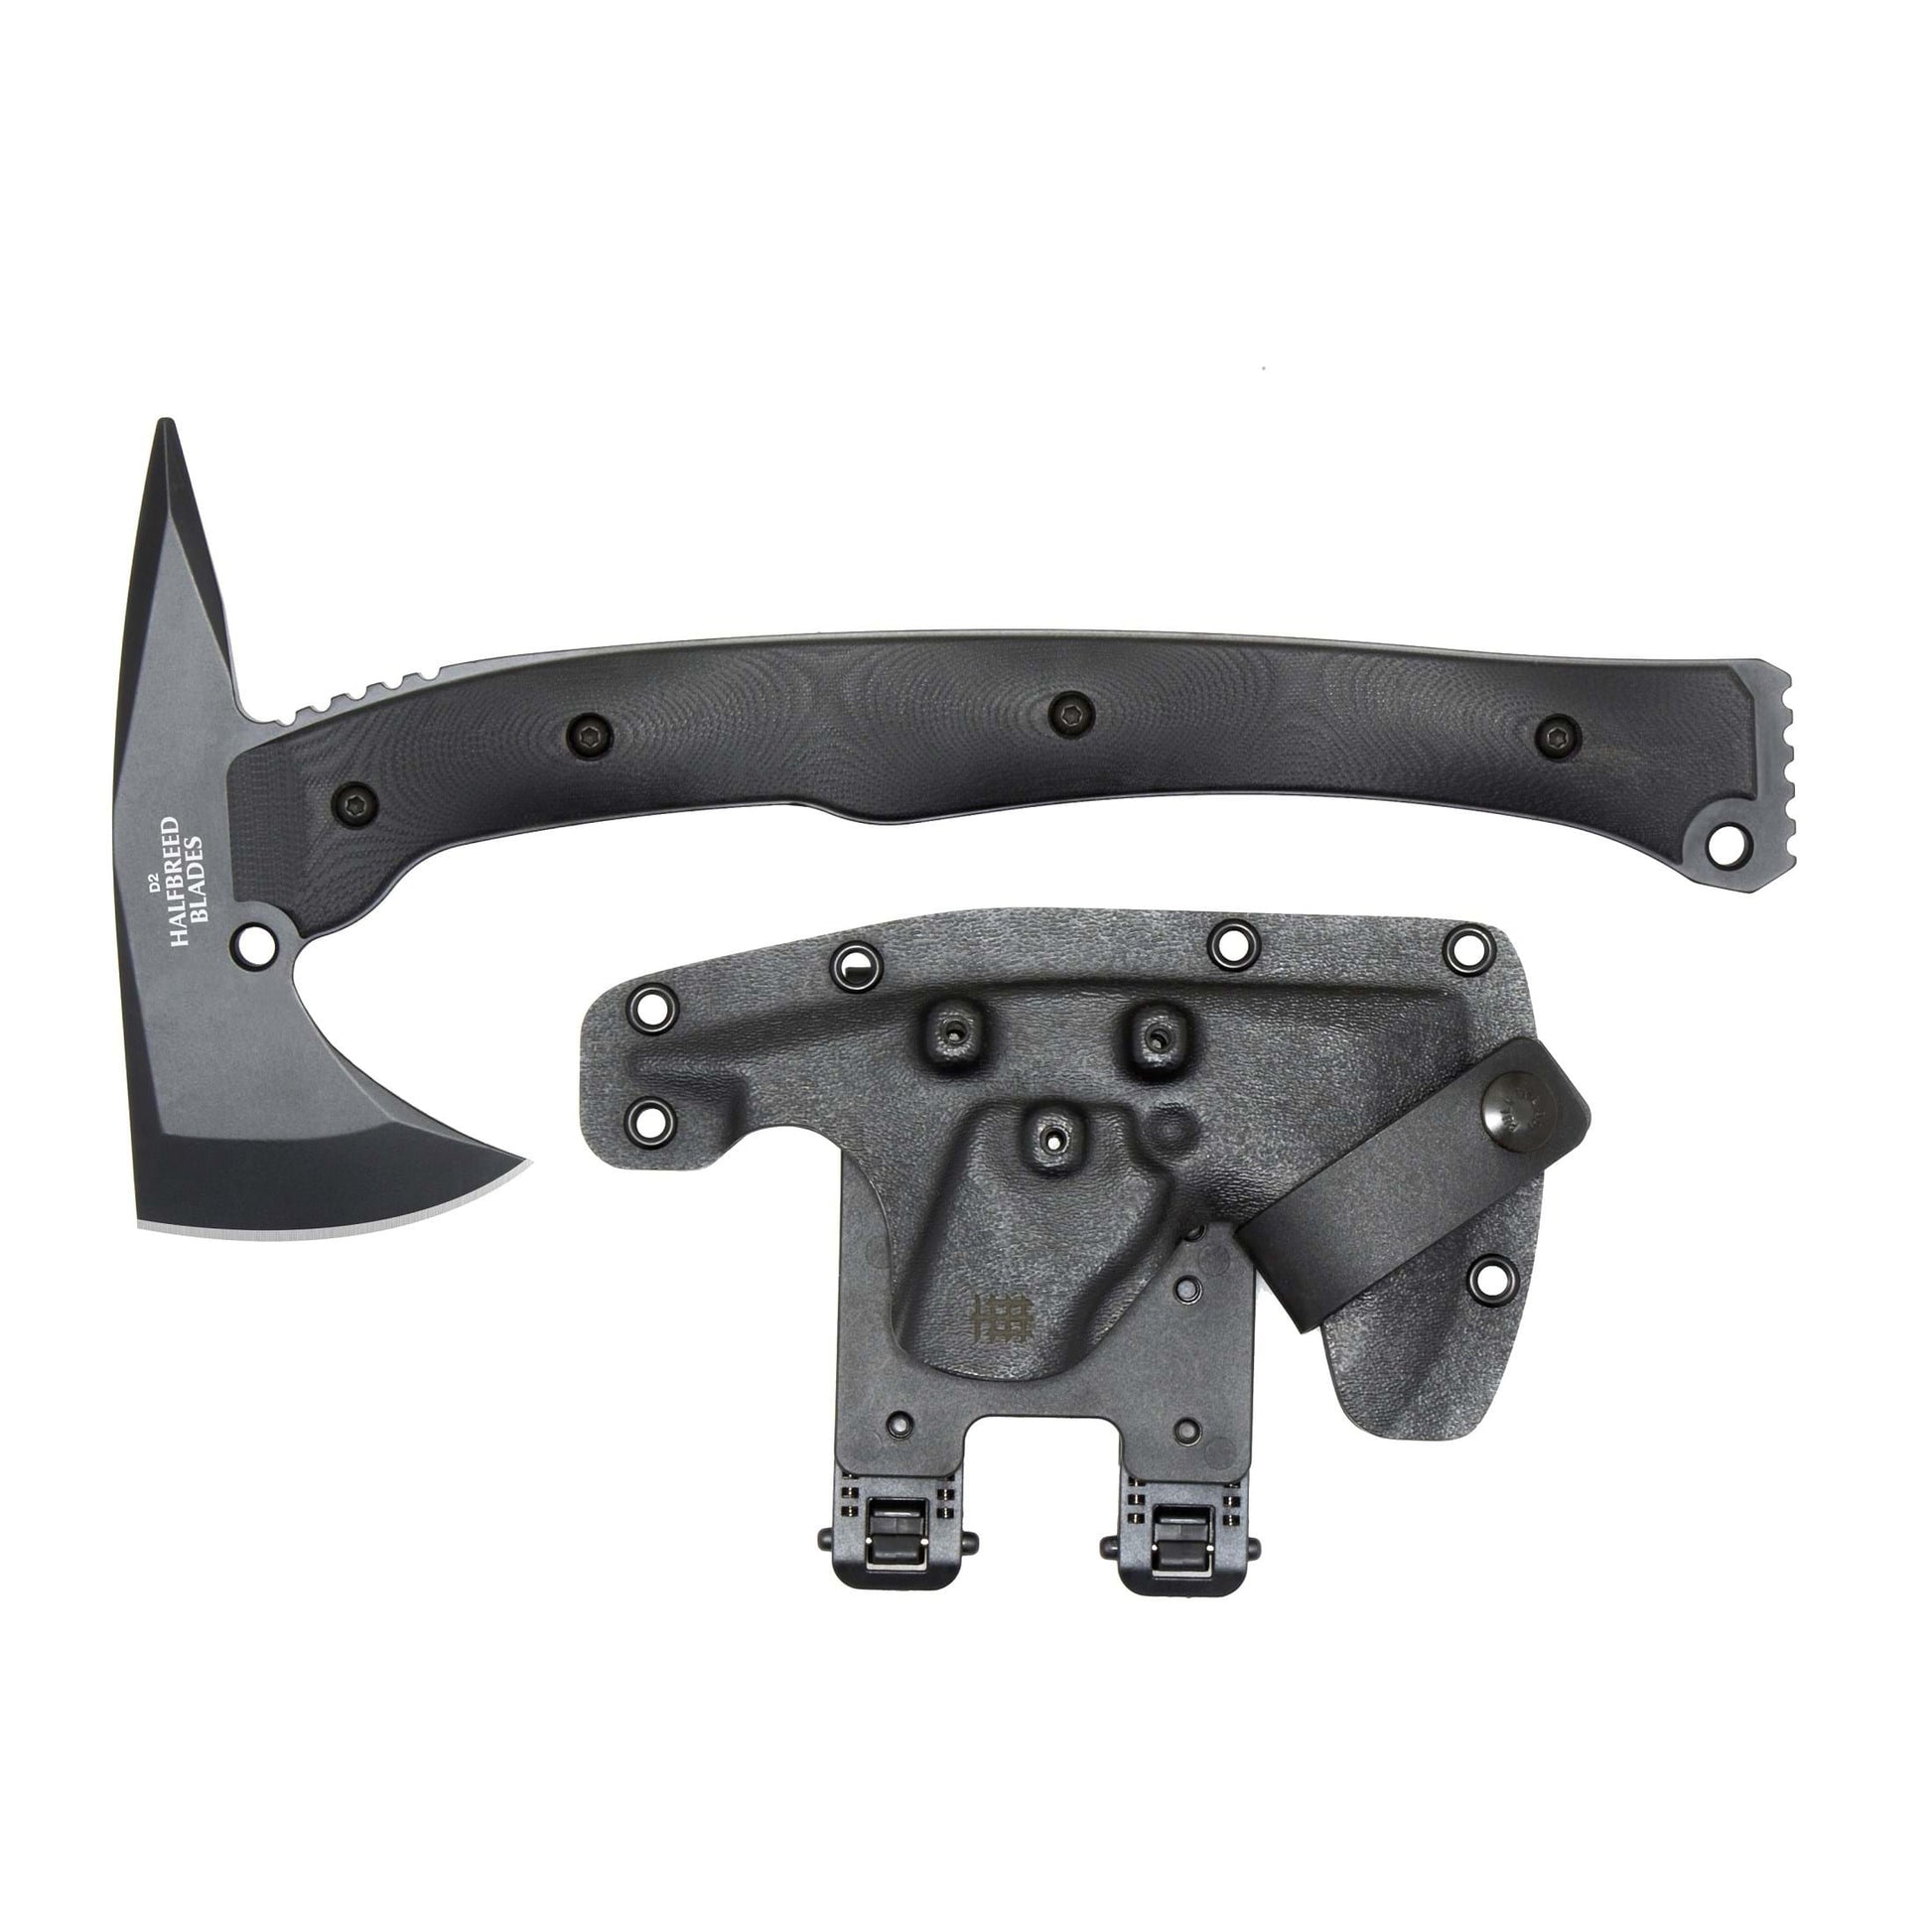 Halfbreed Blades LRA-01 Black Large Rescue Axe 4